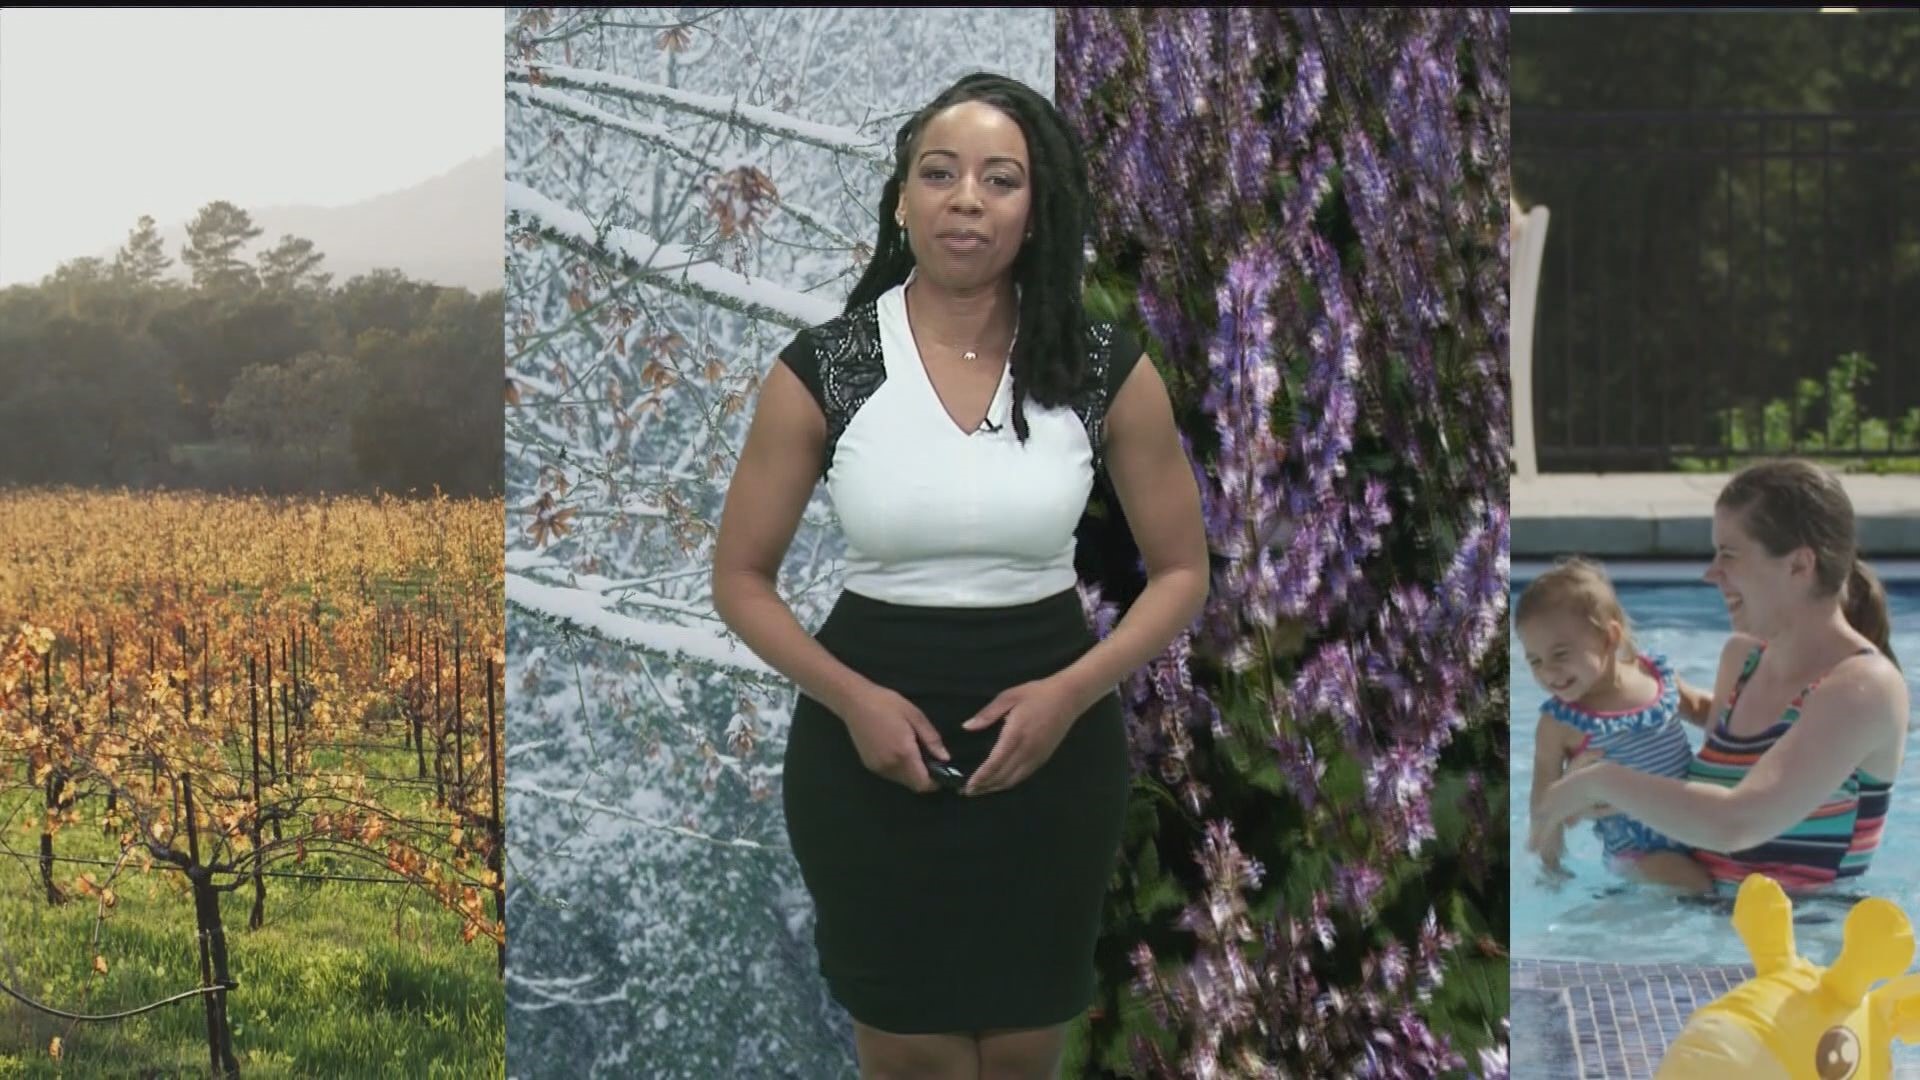 Monique Robinson talks about the beauty in each of the seasons.